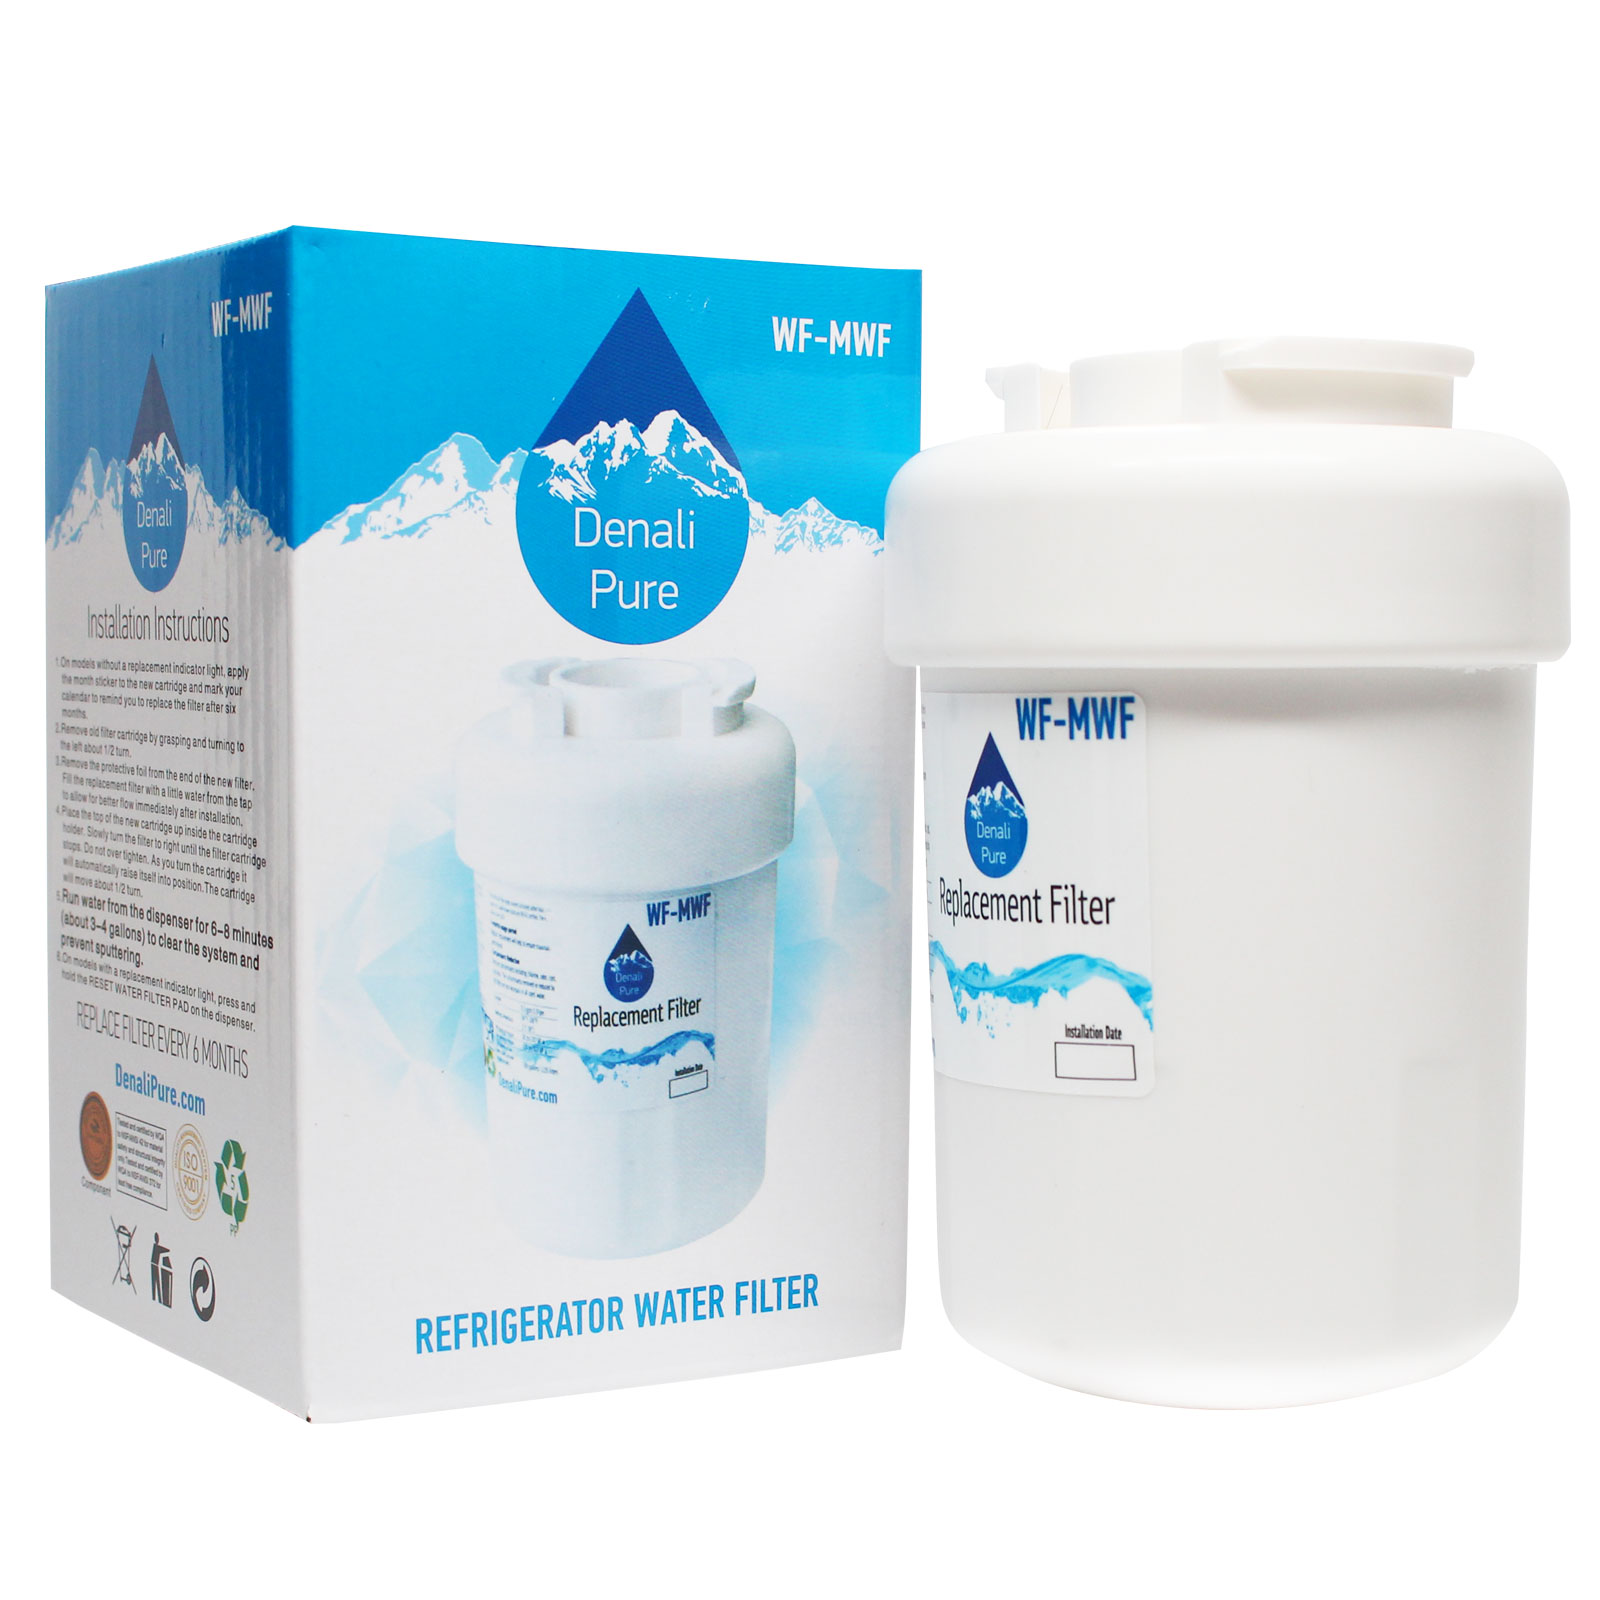 Replacement General Electric GSHF6LGBCHWW Refrigerator Water Filter - Compatible General Electric MWF, MWFP Fridge Water Filter Cartridge - image 1 of 3